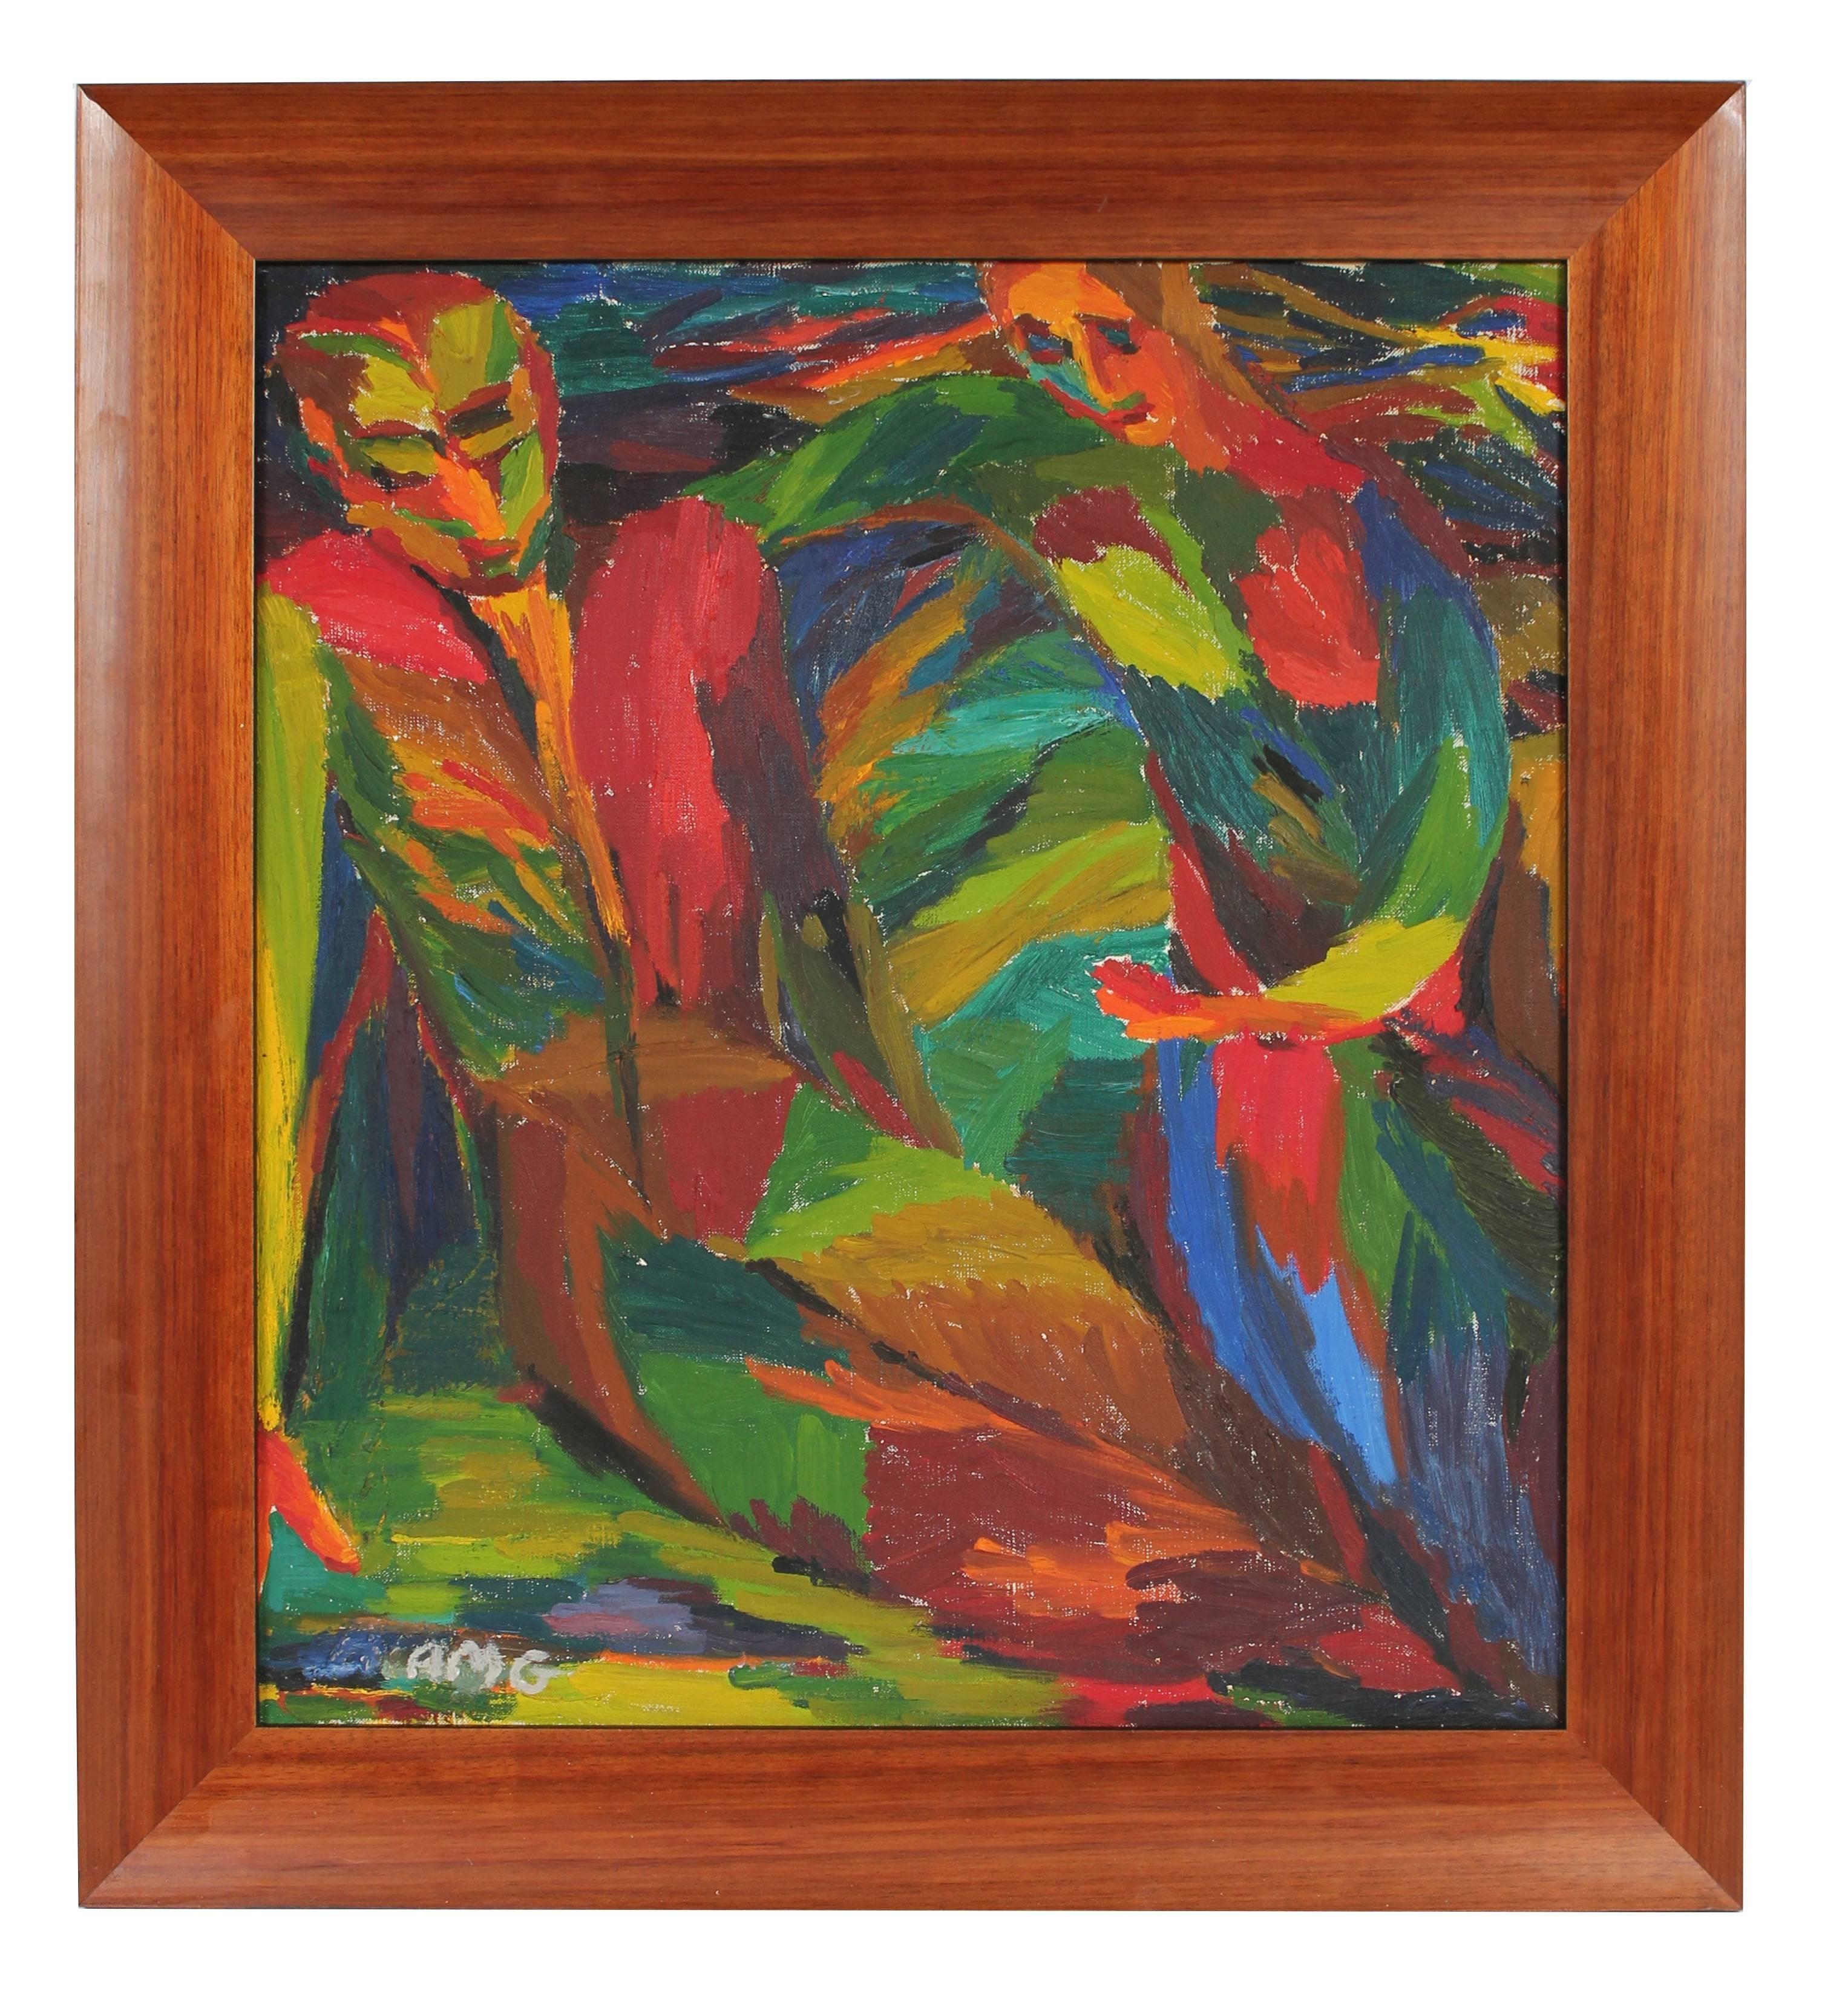 Anne Granick Figurative Painting - Colorful Expressionist Figures, Oil on Canvas, Circa 1950